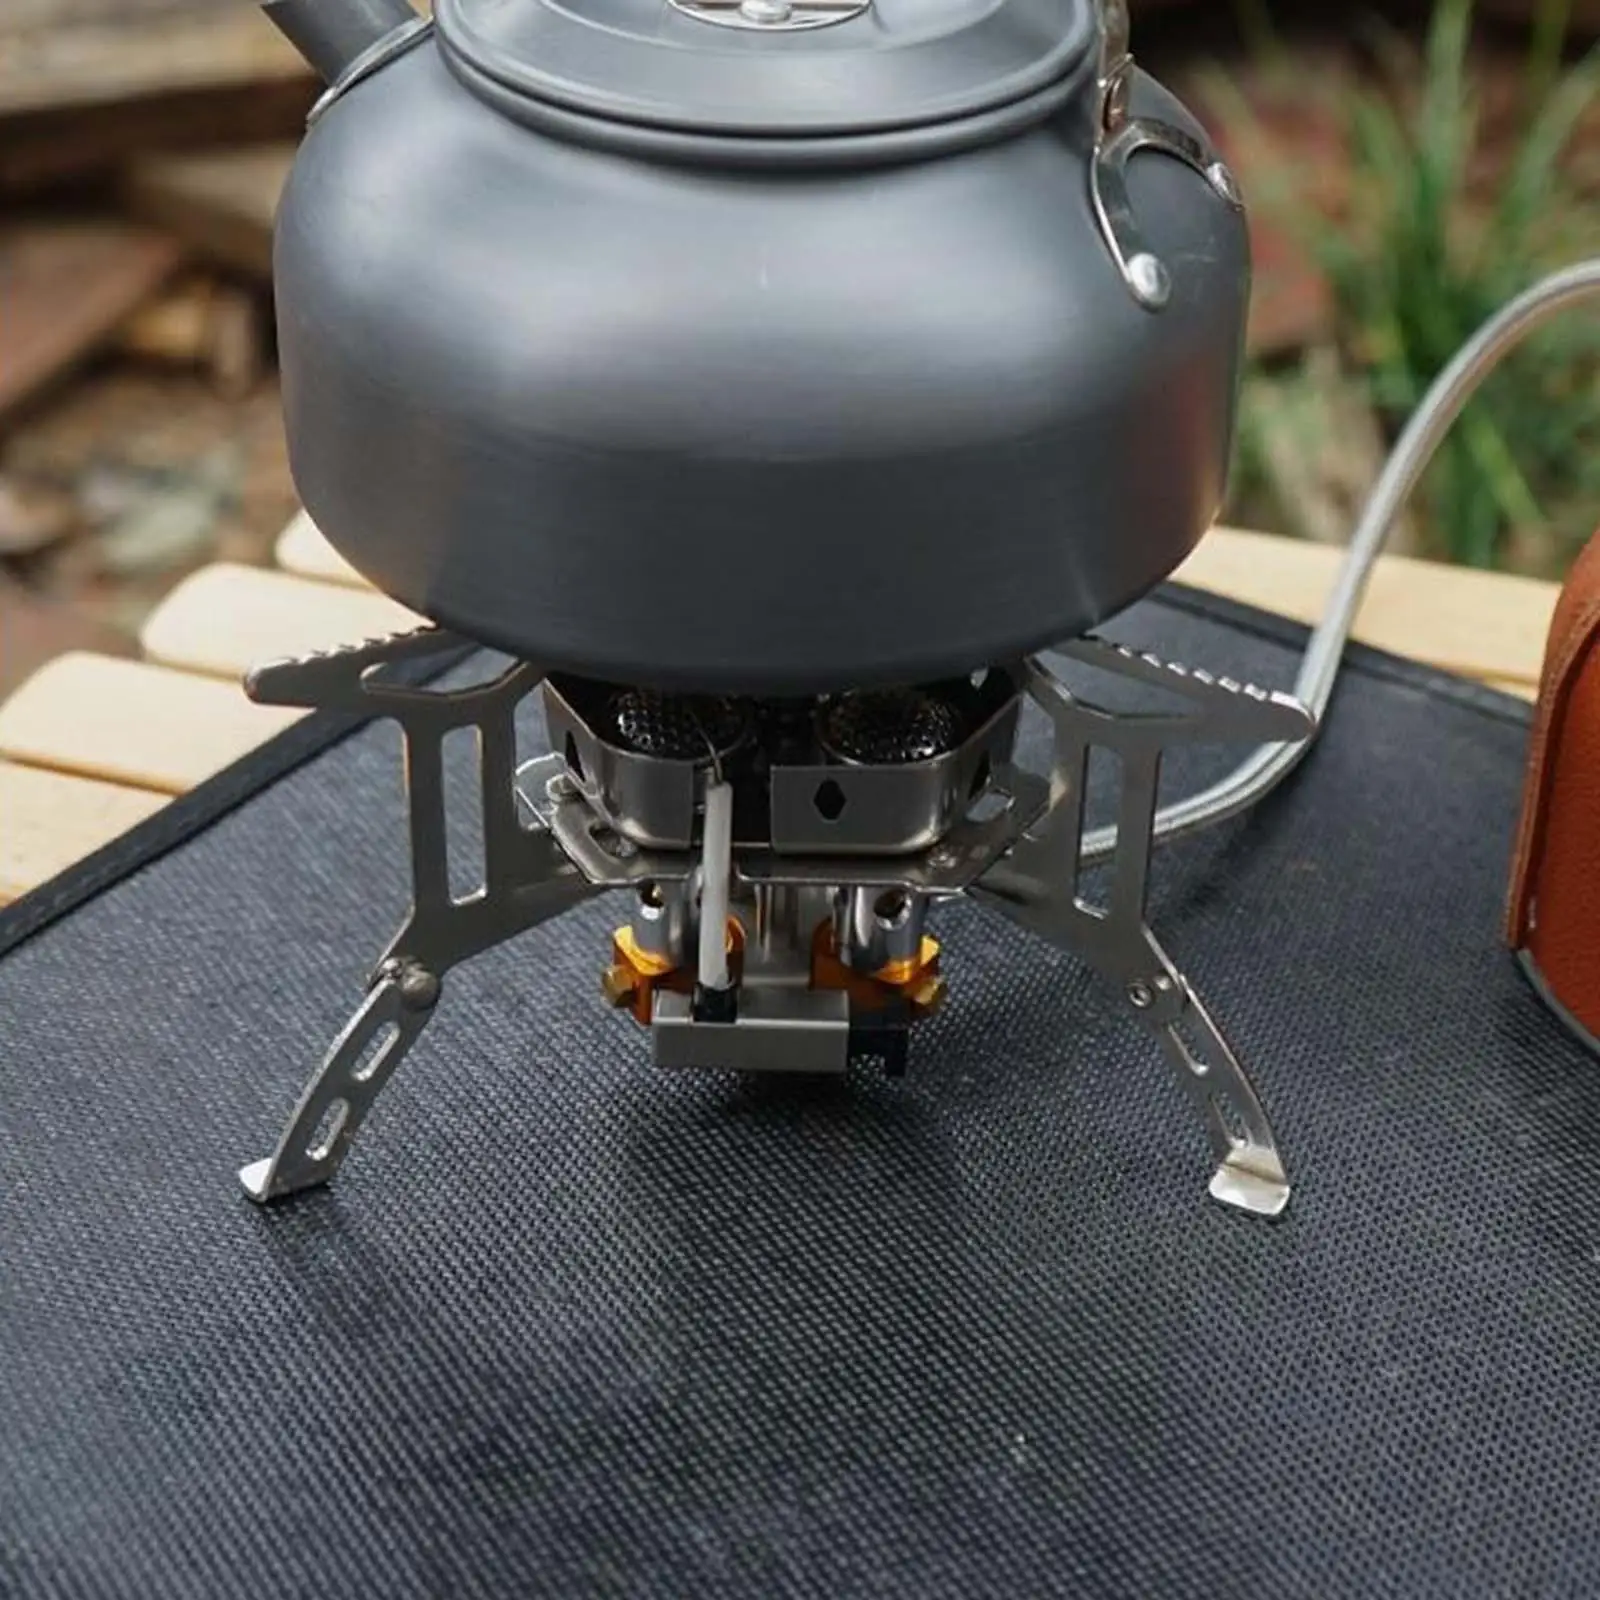 Durable Camping Gas Stove 3 Heads Foldable Cooking Tool Gear Propane Stove Backpack Stove for Picnic Outdoor Cooking Travel